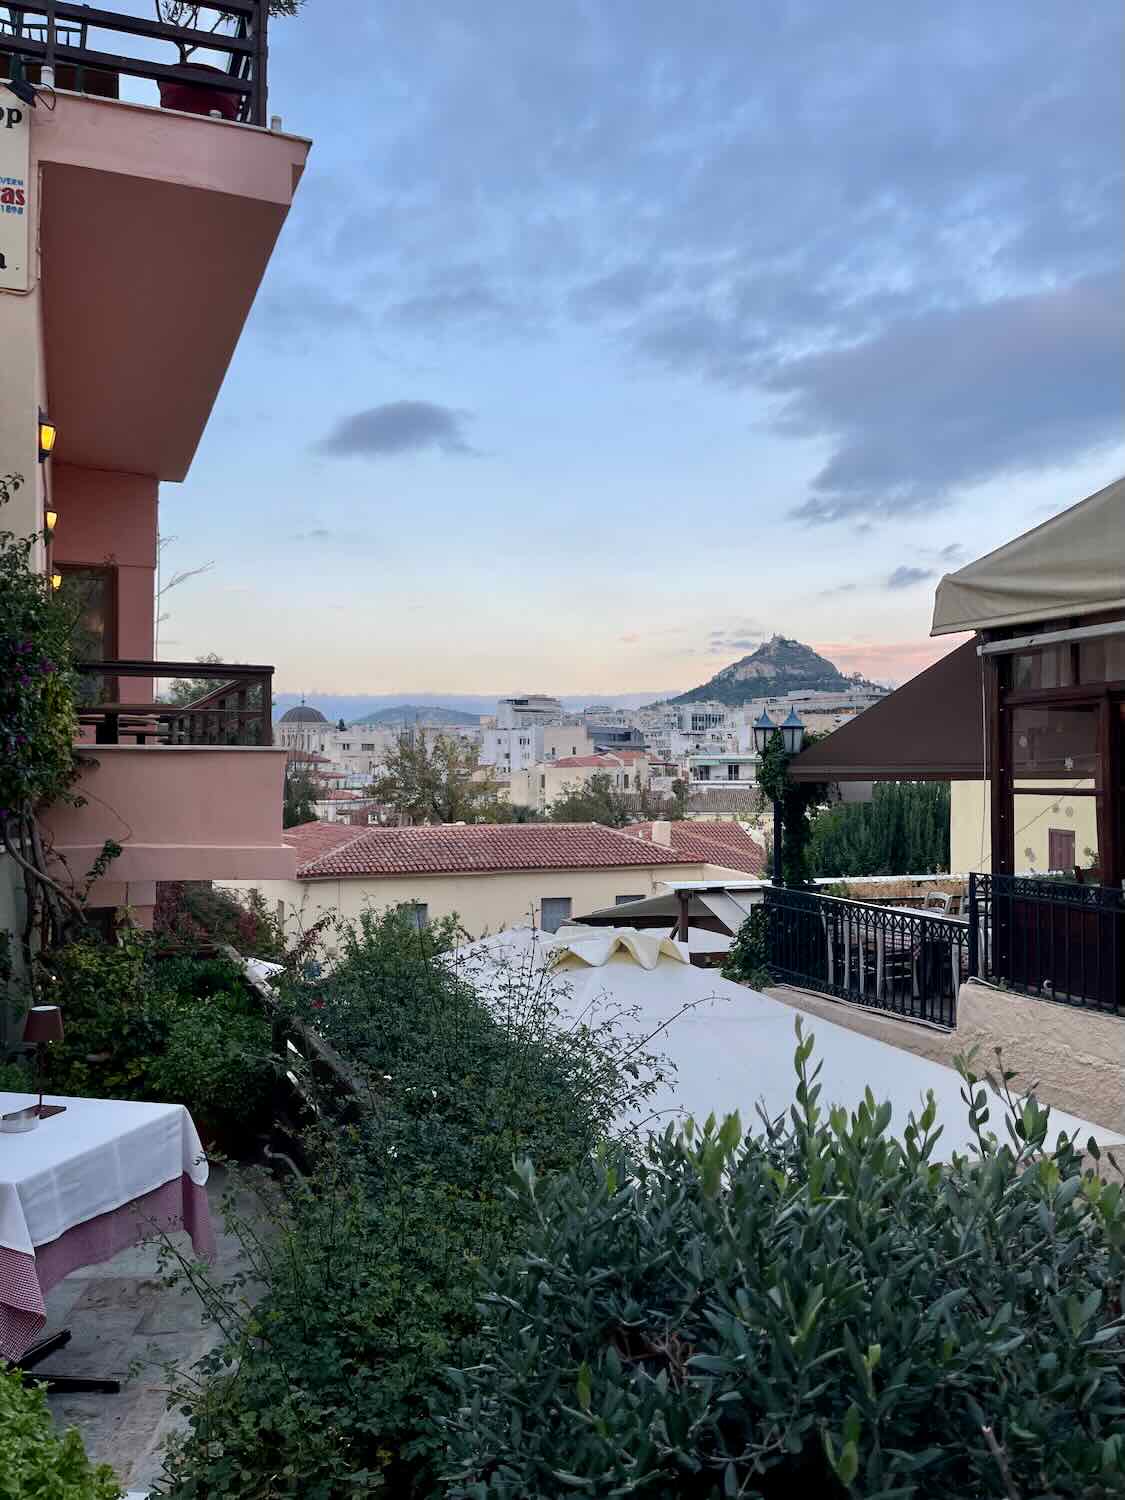 A view of Athens from a balcony at dusk, with Mount Lycabettus visible in the distance. The foreground features a table with a checkered tablecloth and lush greenery.